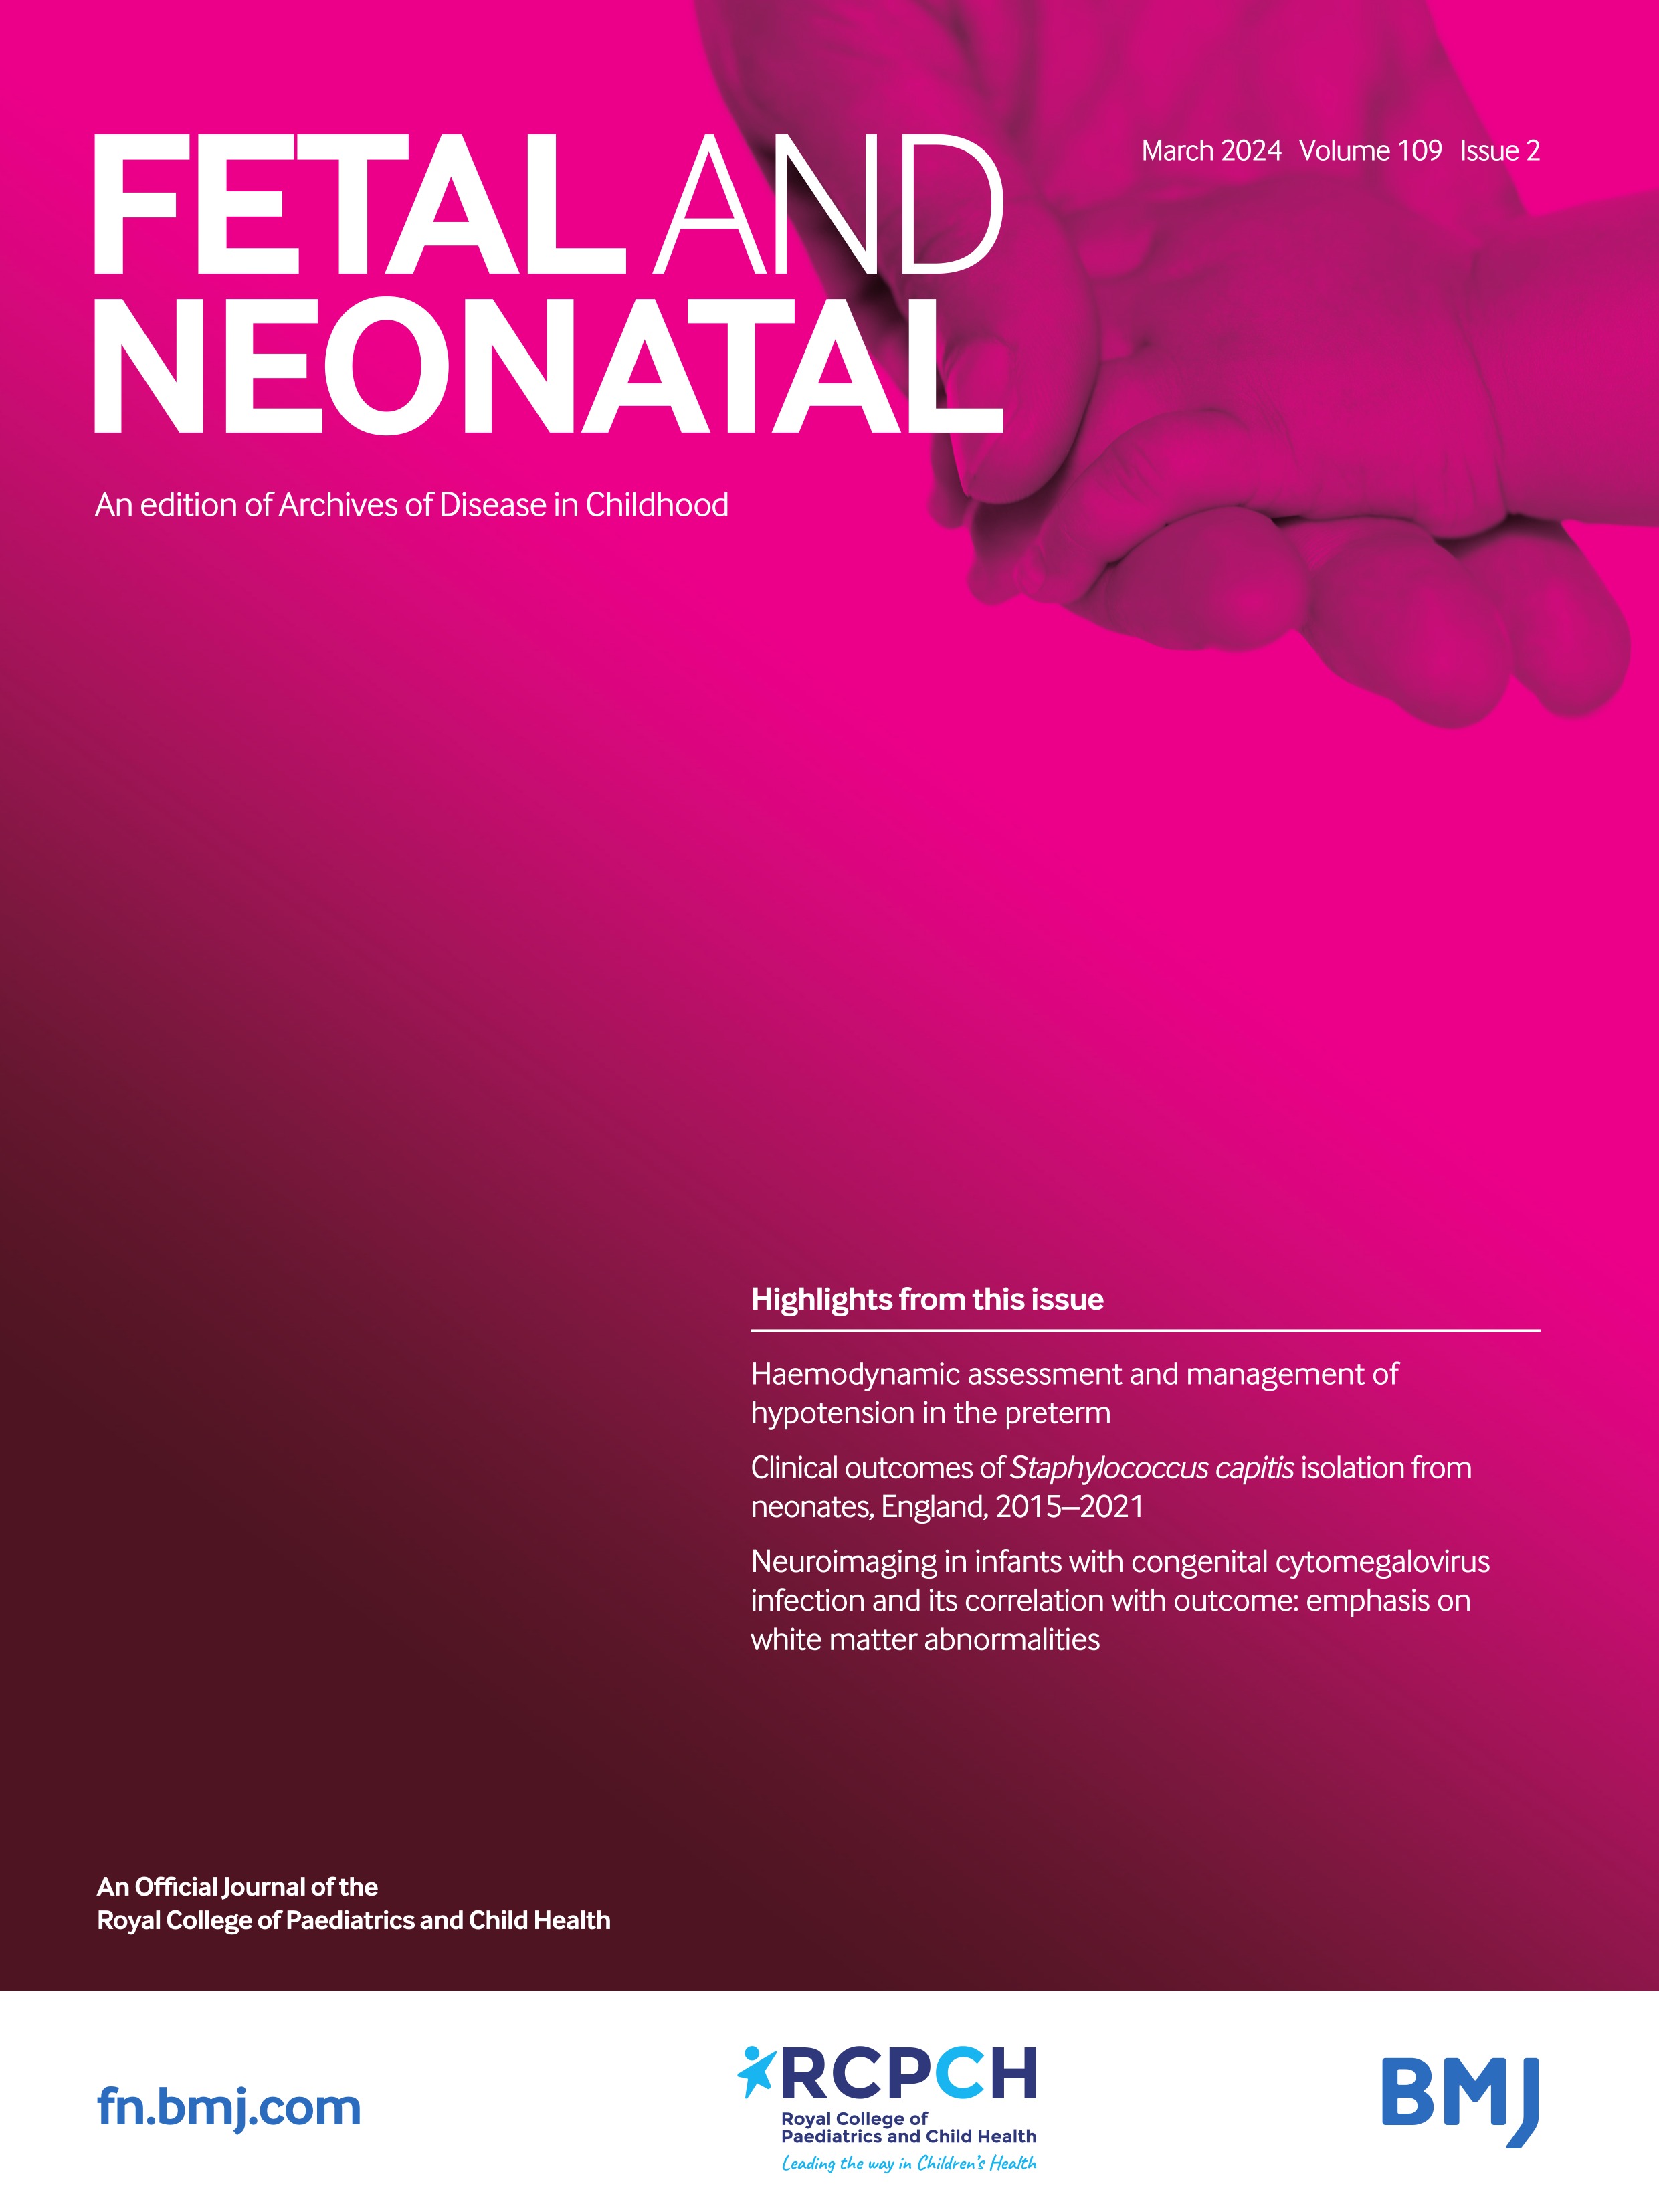 Congenital duodenal obstruction repair with and without transanastomotic tube feeding: a systematic review and meta-analysis